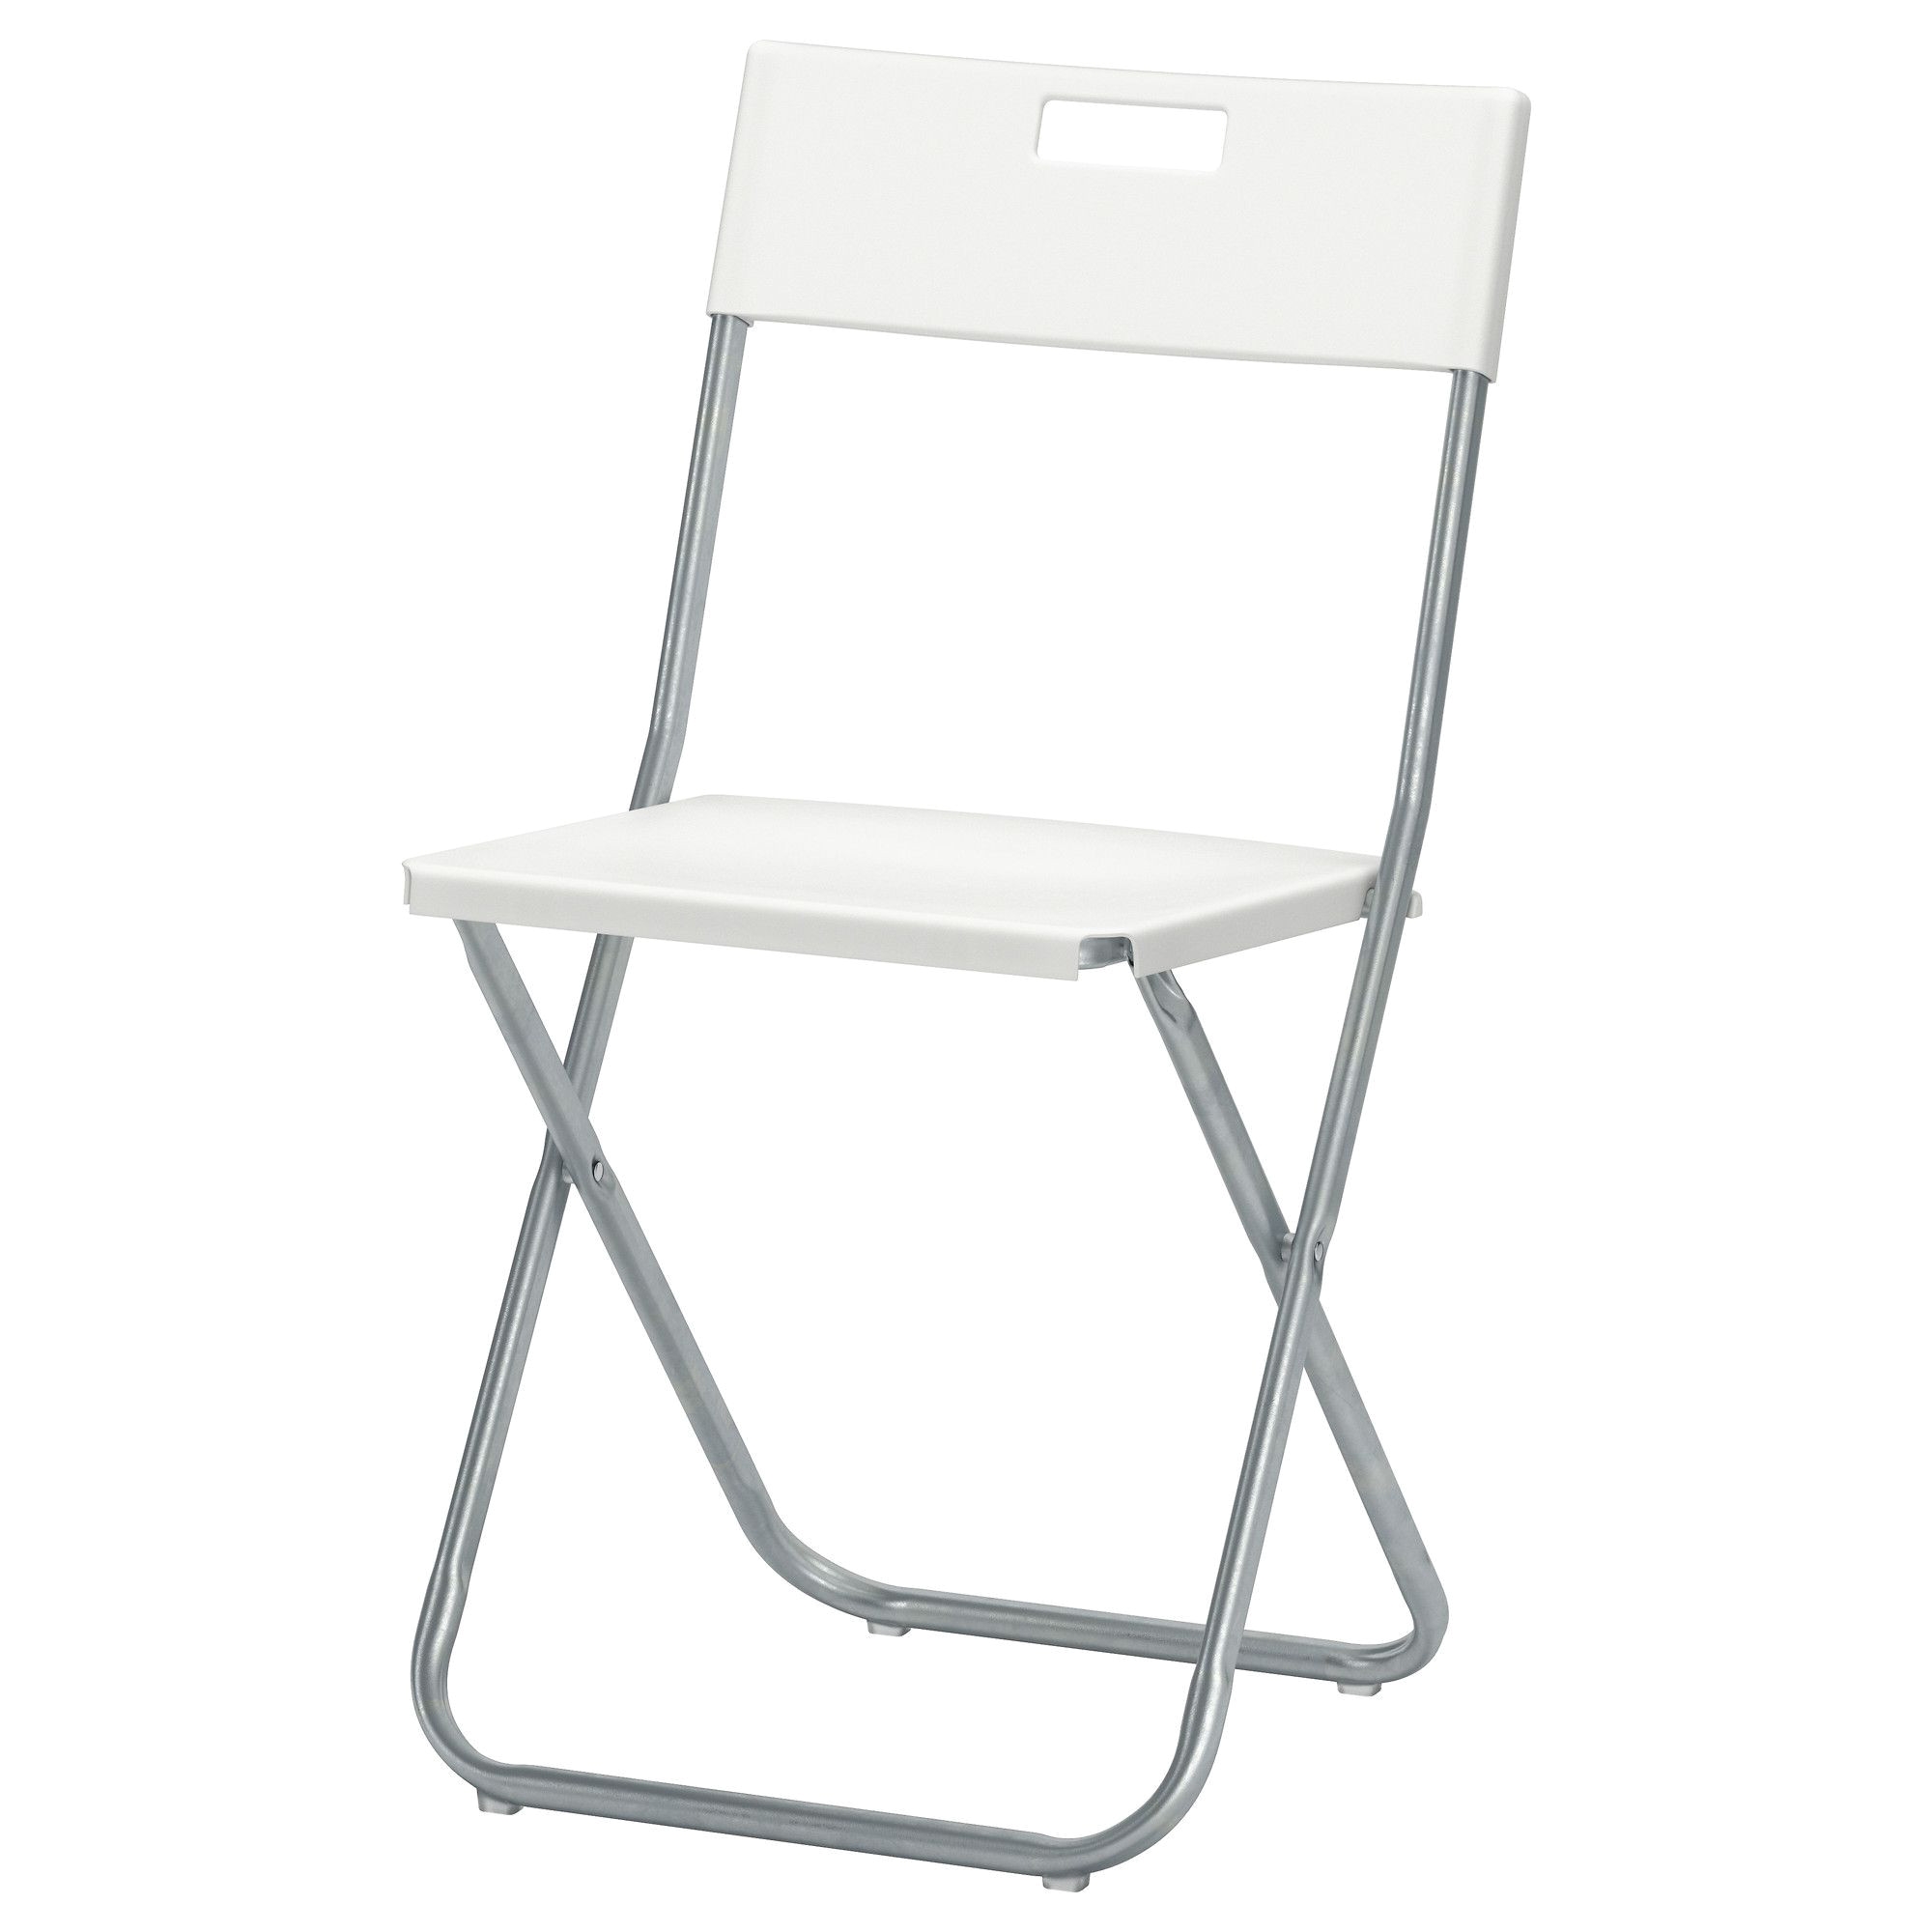 full size of chair inspiring inspirational plastic folding for your modern furniture with picture ideas